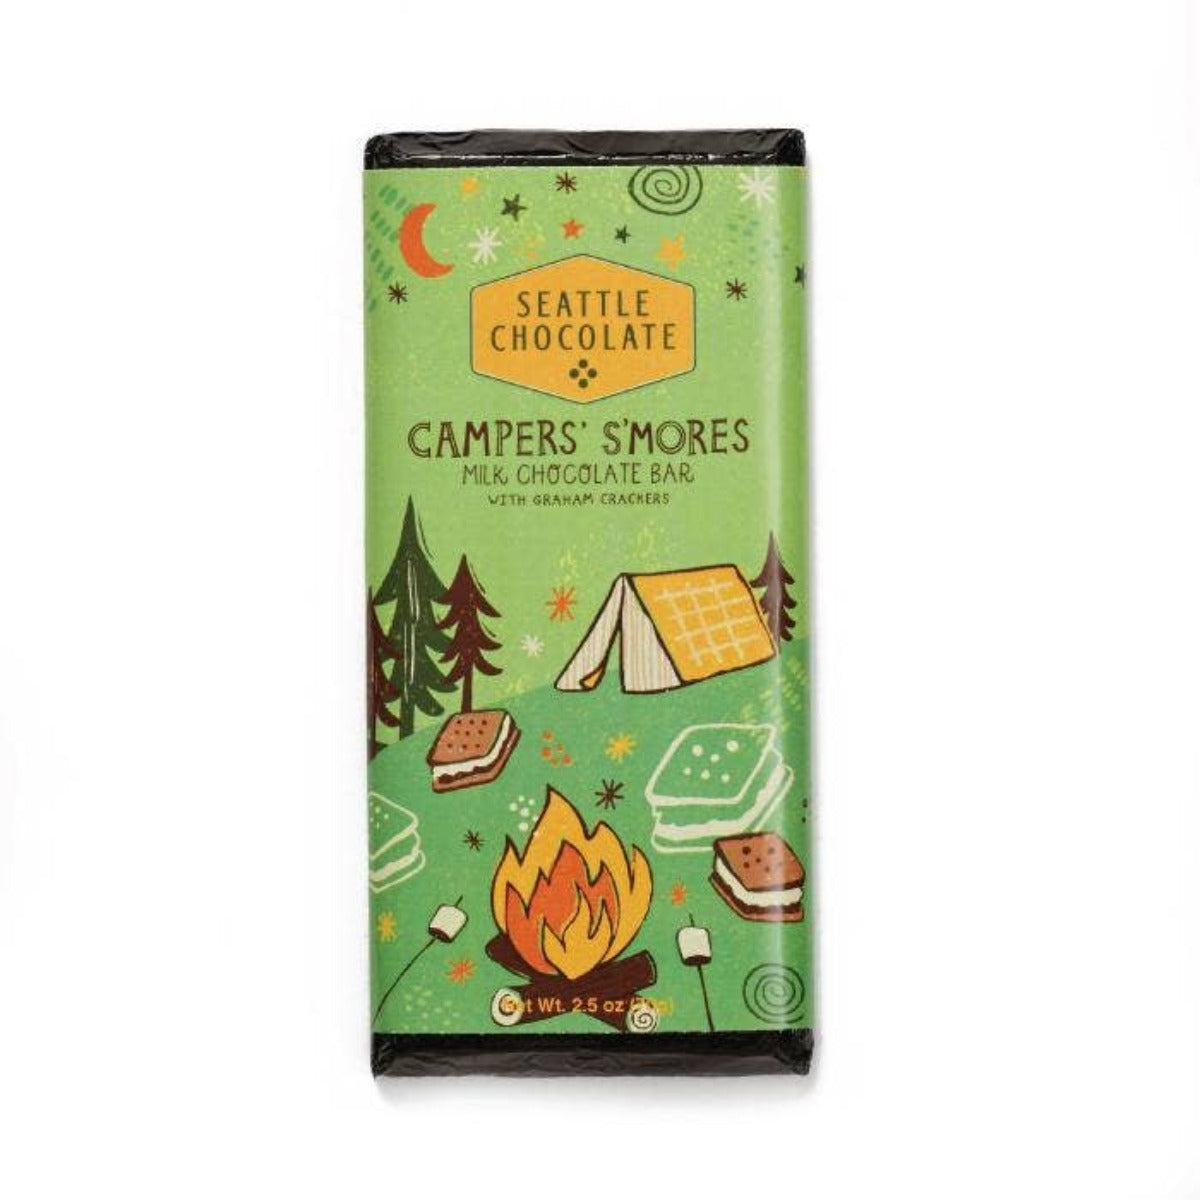 Campers S'mores Chocolate bar